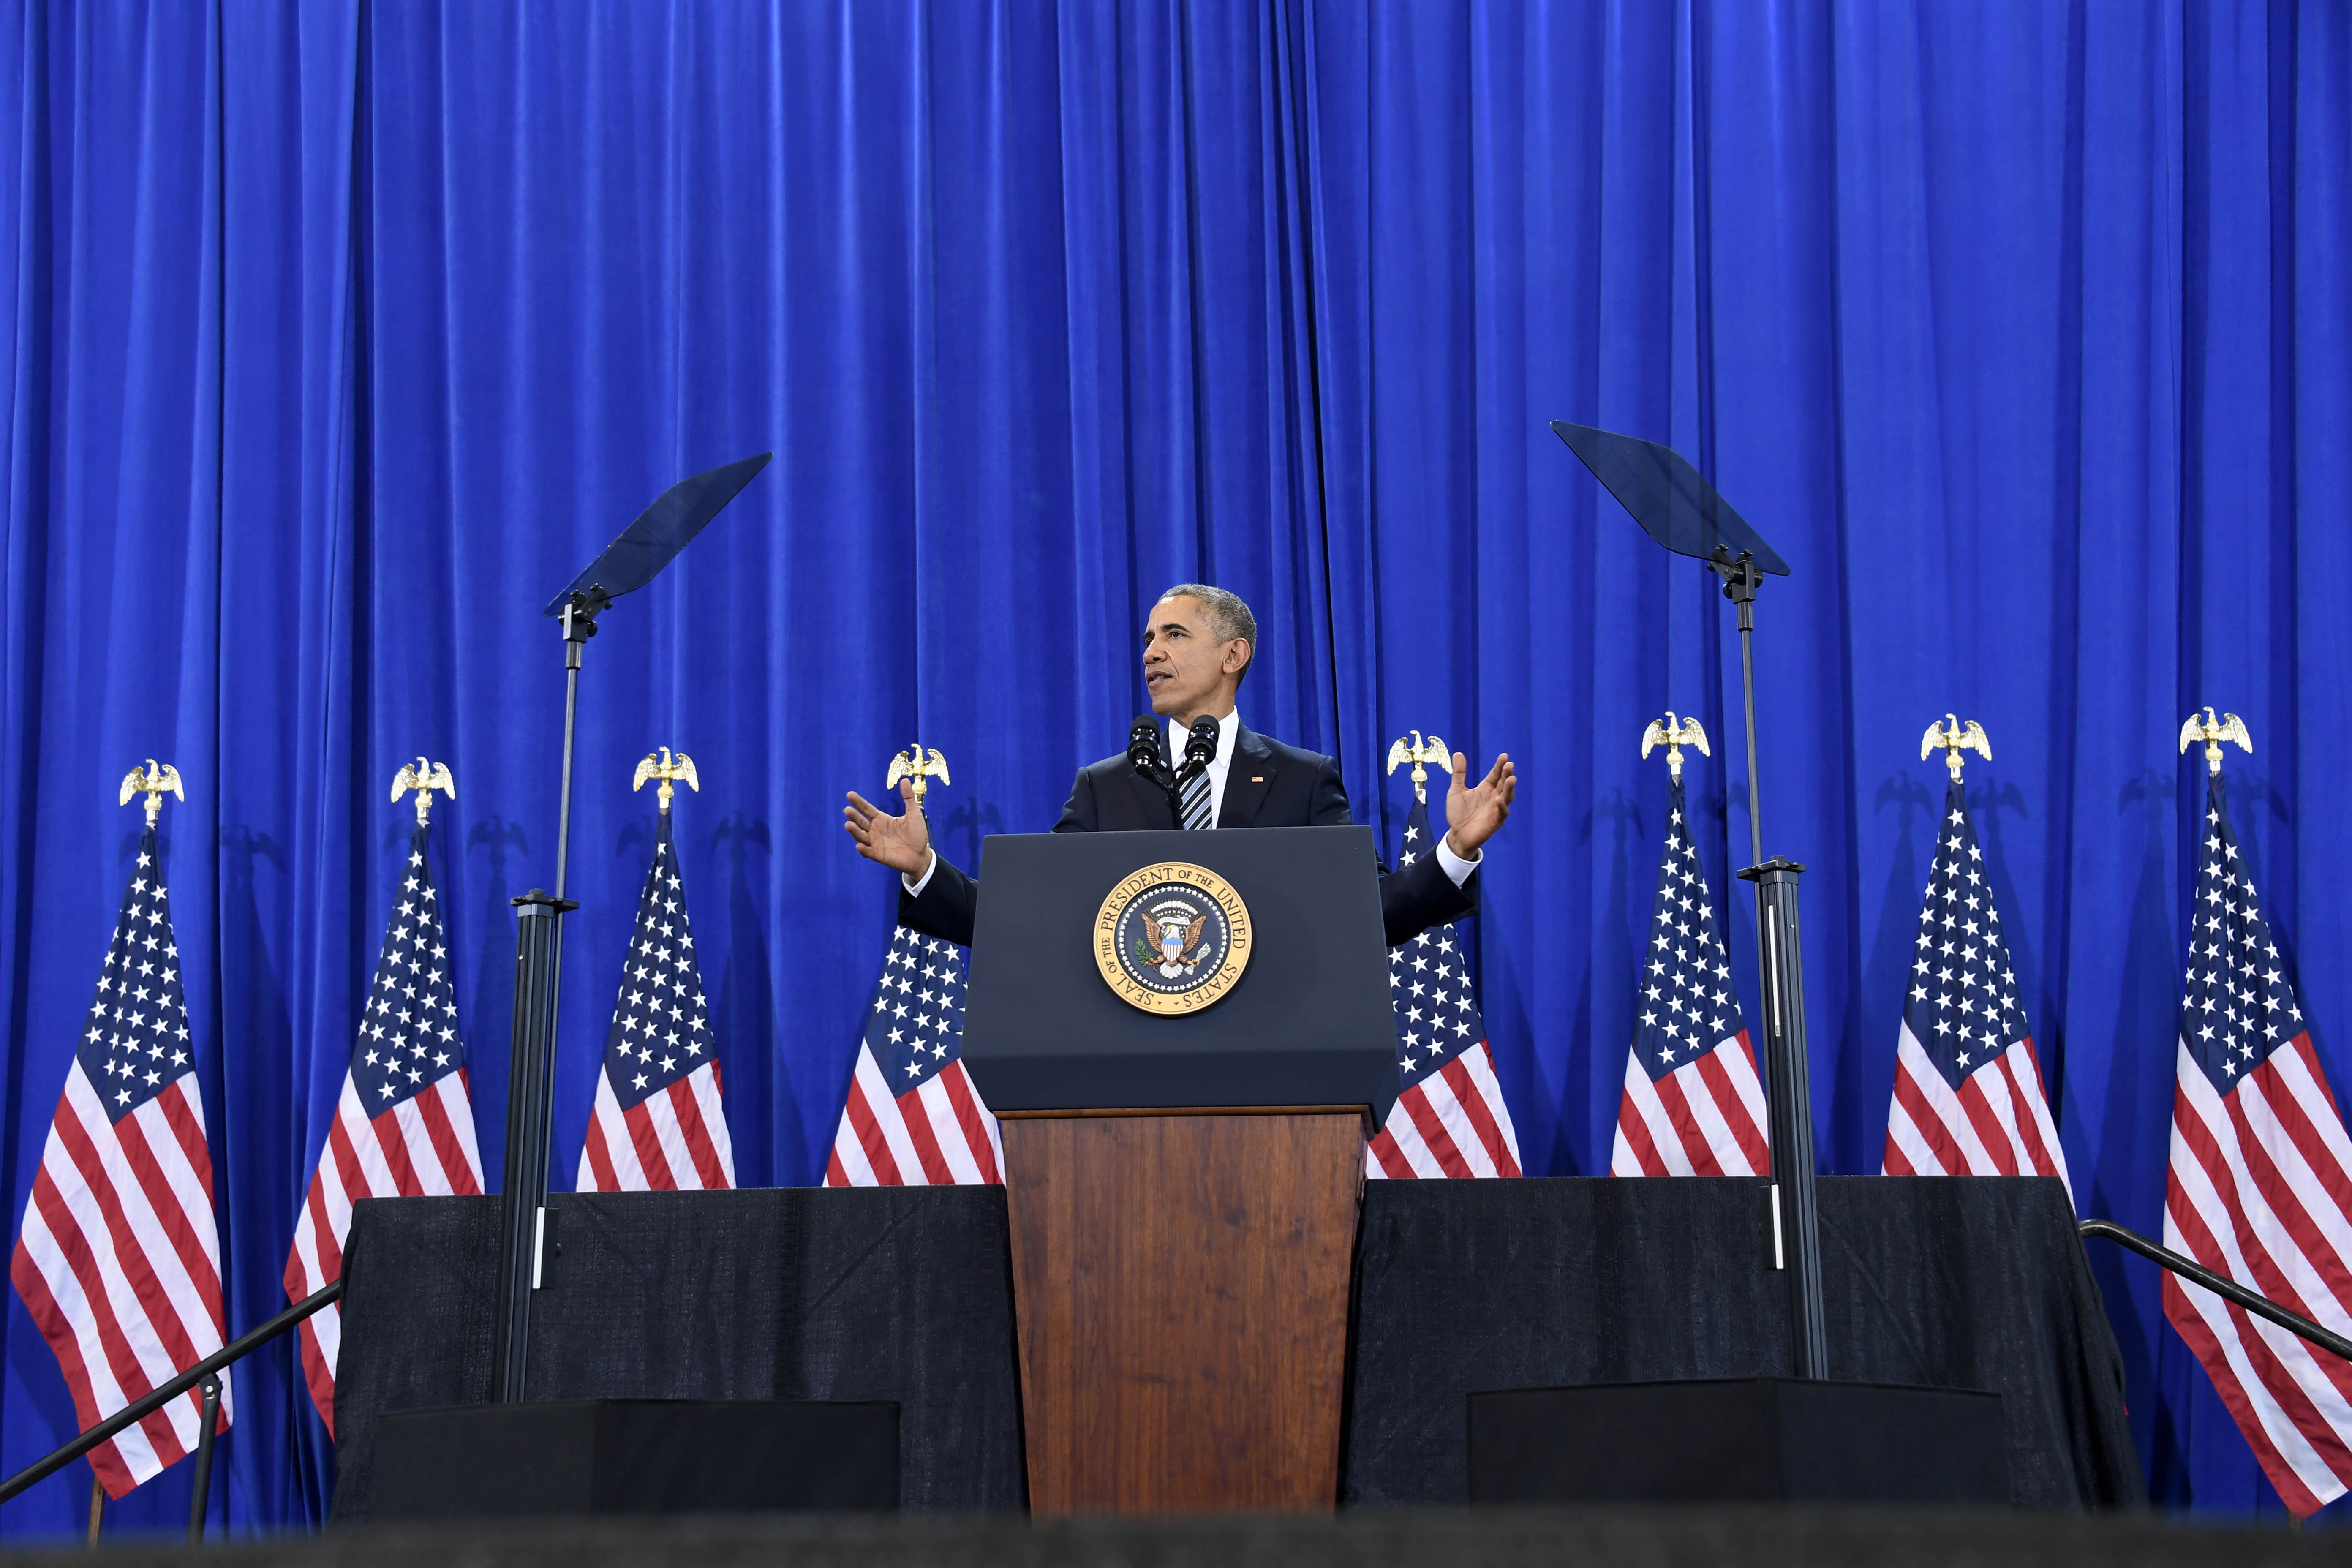 President Obama Gives National Security Speech To Macdill Service Members Macdill Air Force Base News